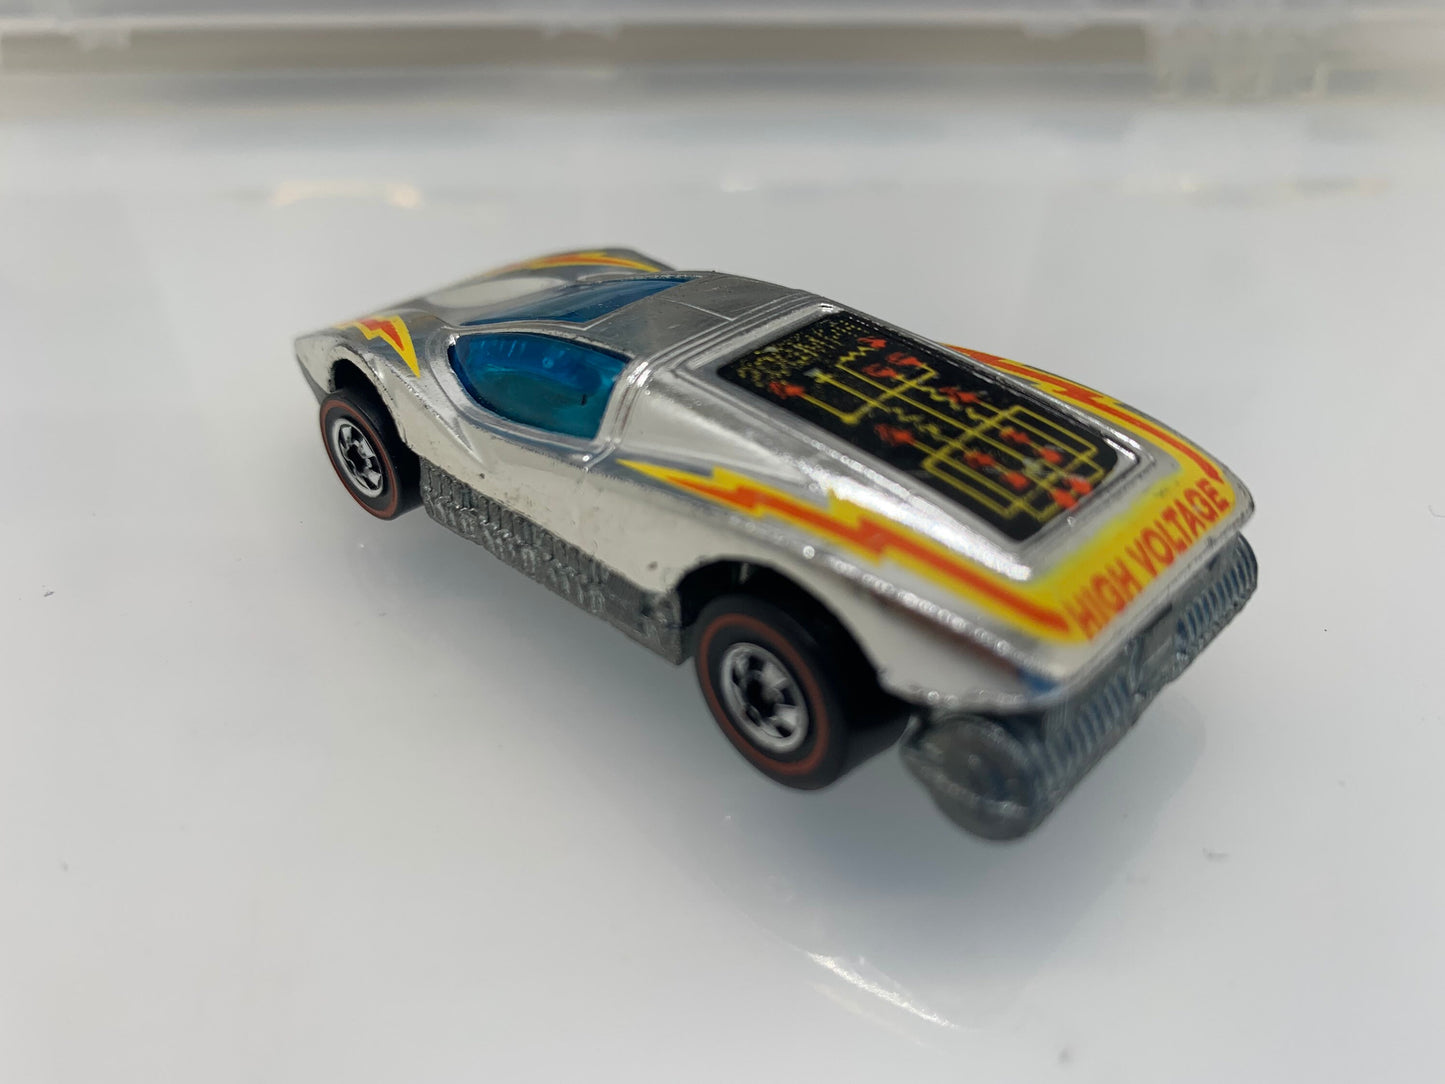 Redline Hot Wheels Large Charge Chrome Collectable 1:64 Scale Miniature Model Toy Car Perfect Birthday Gift Vintage Hot Wheels